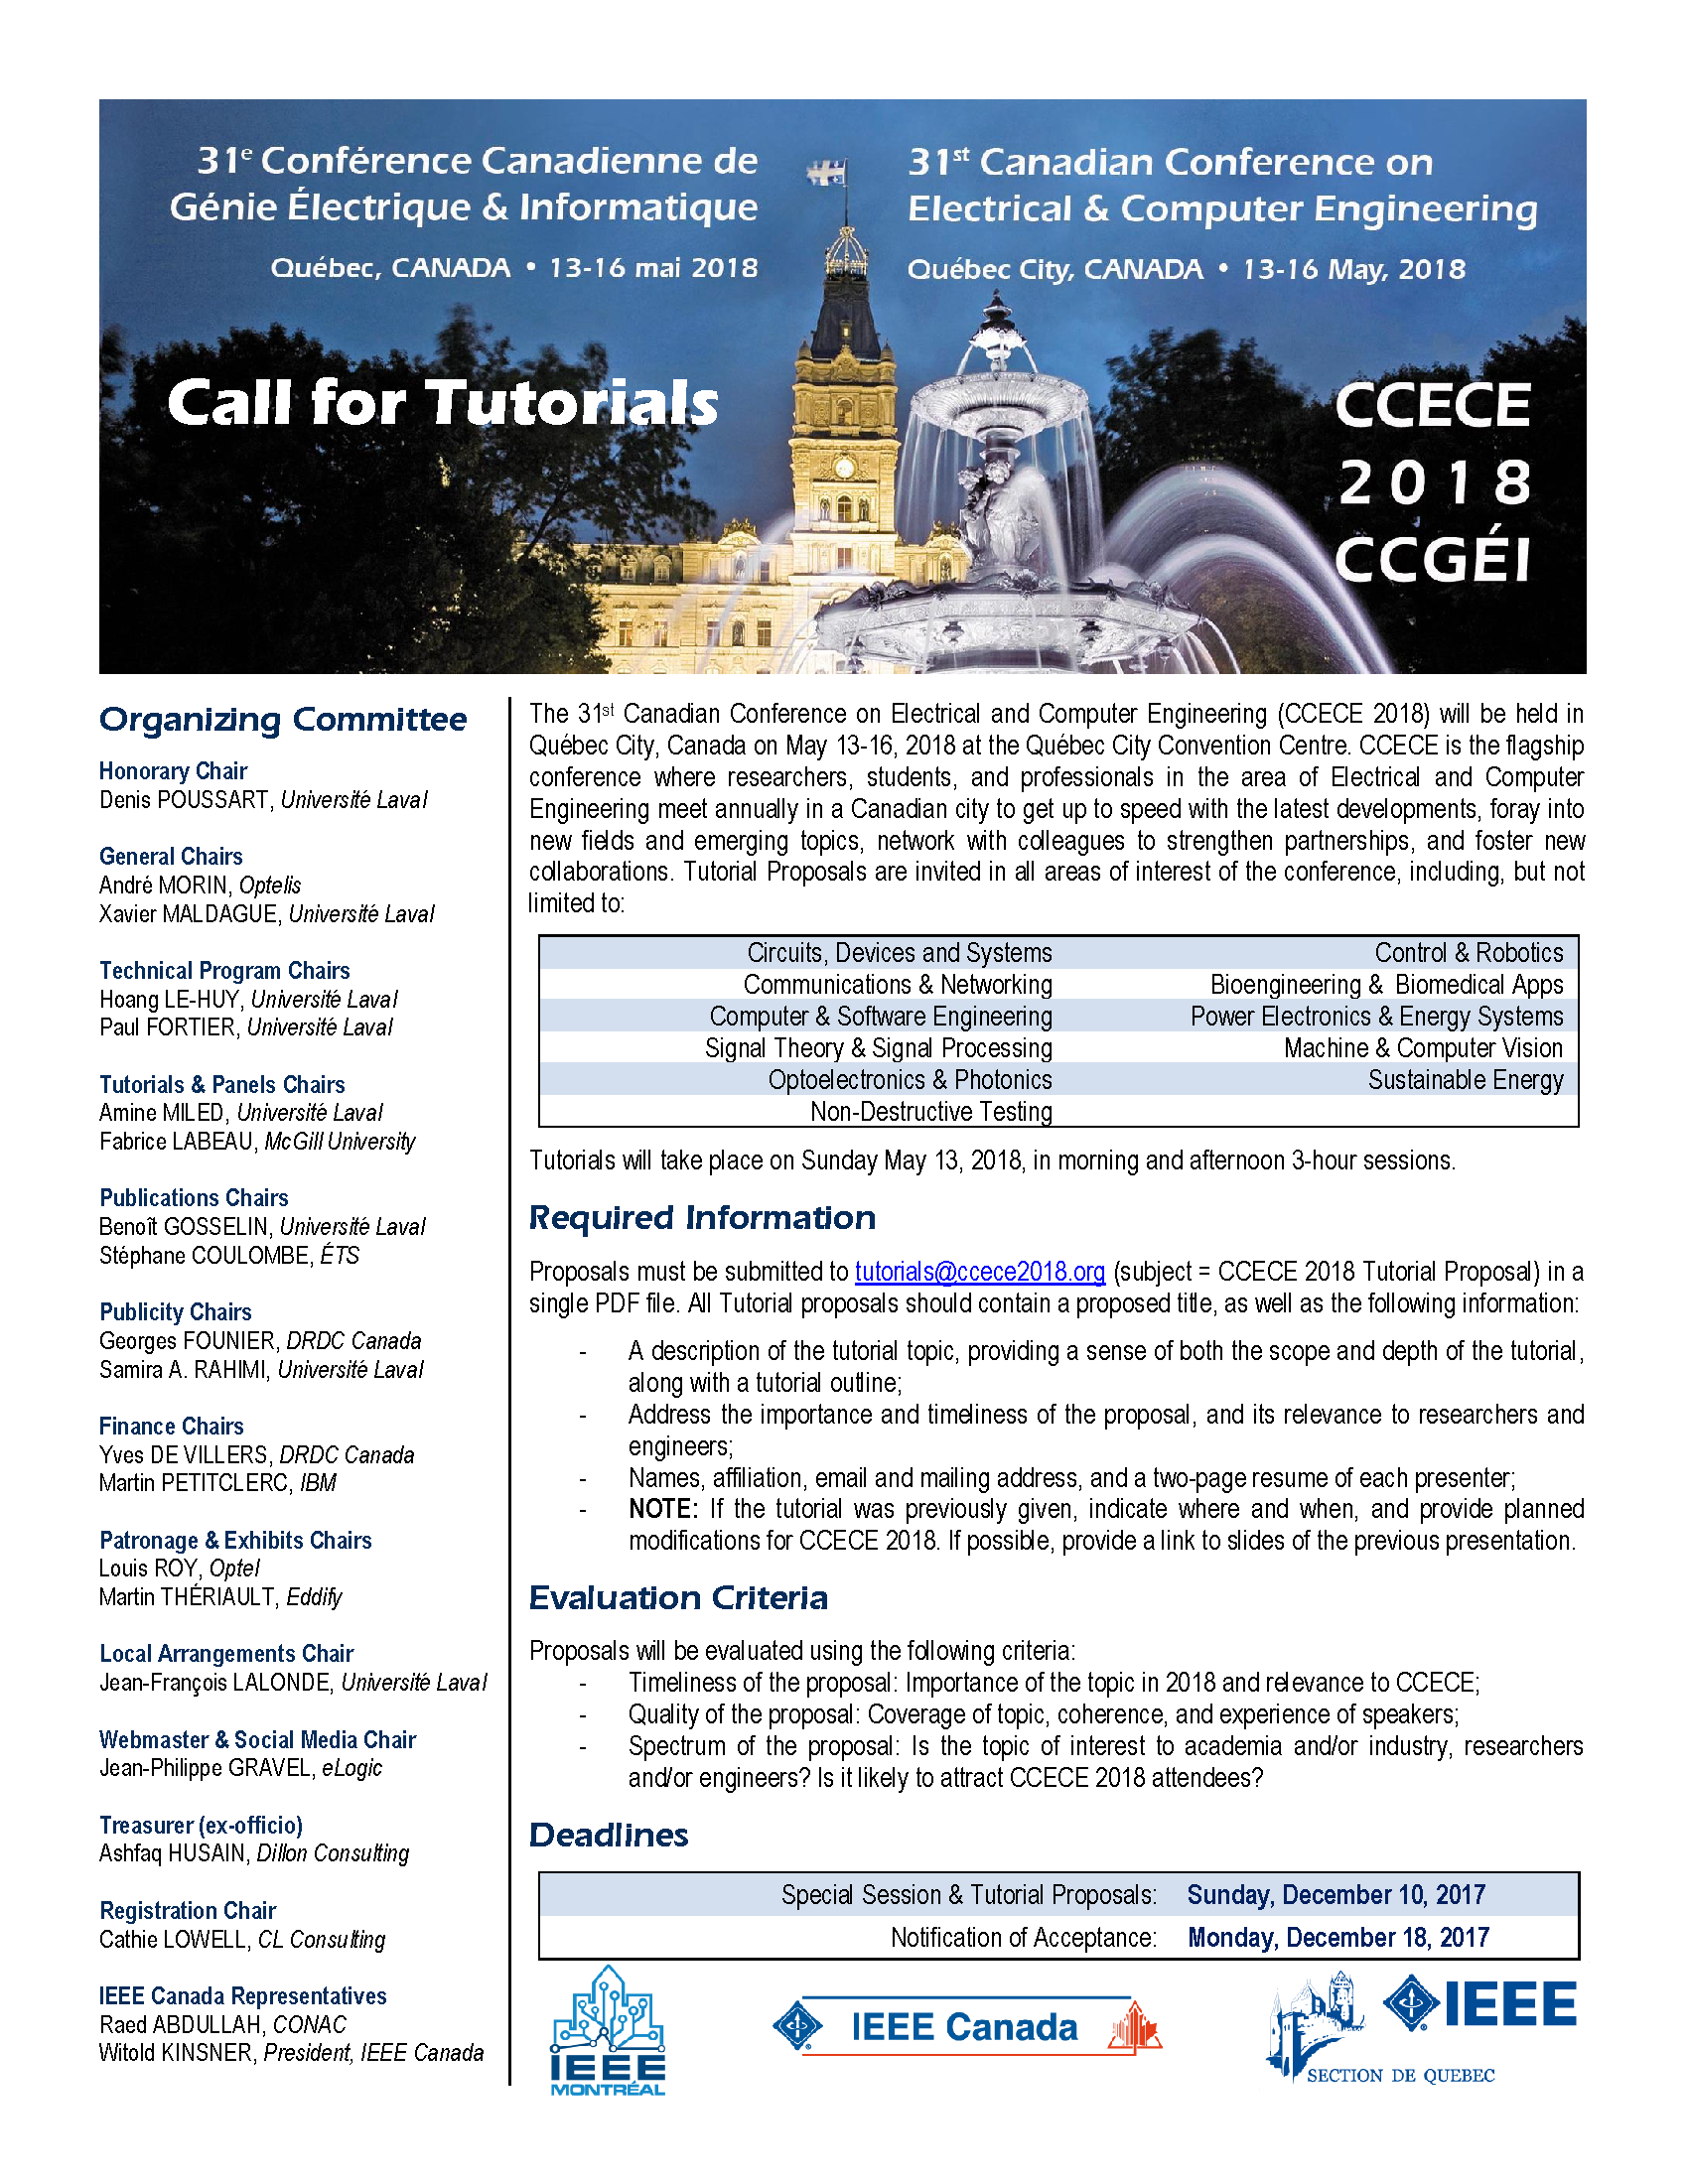 CCECE 2018 - Call for Tutorials